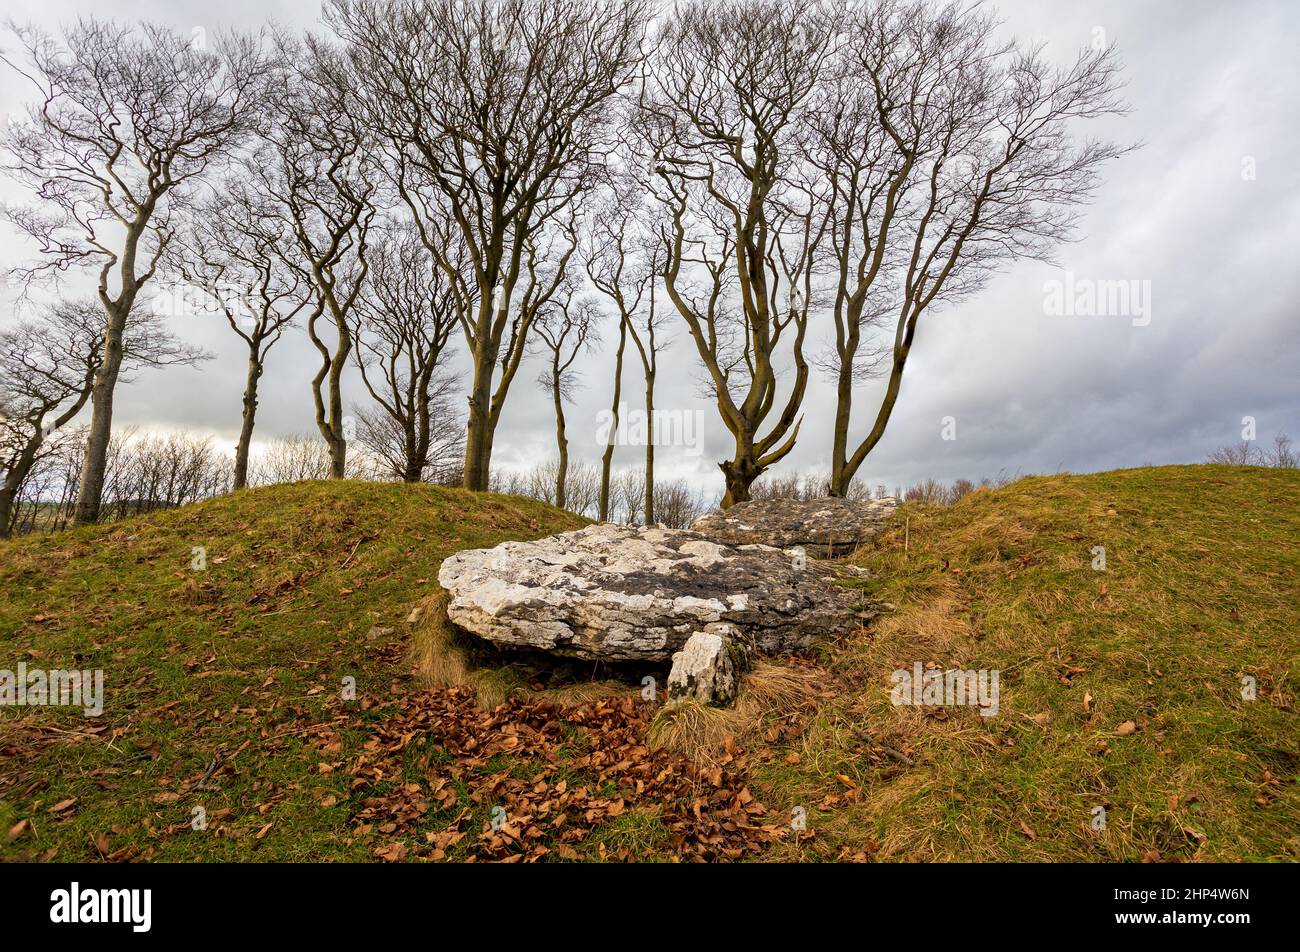 Minninglow is an archaeologhical site in the Peak District National Park, UK. It consists of a chambered tomb and Bronze Age bowl barrows. Stock Photo